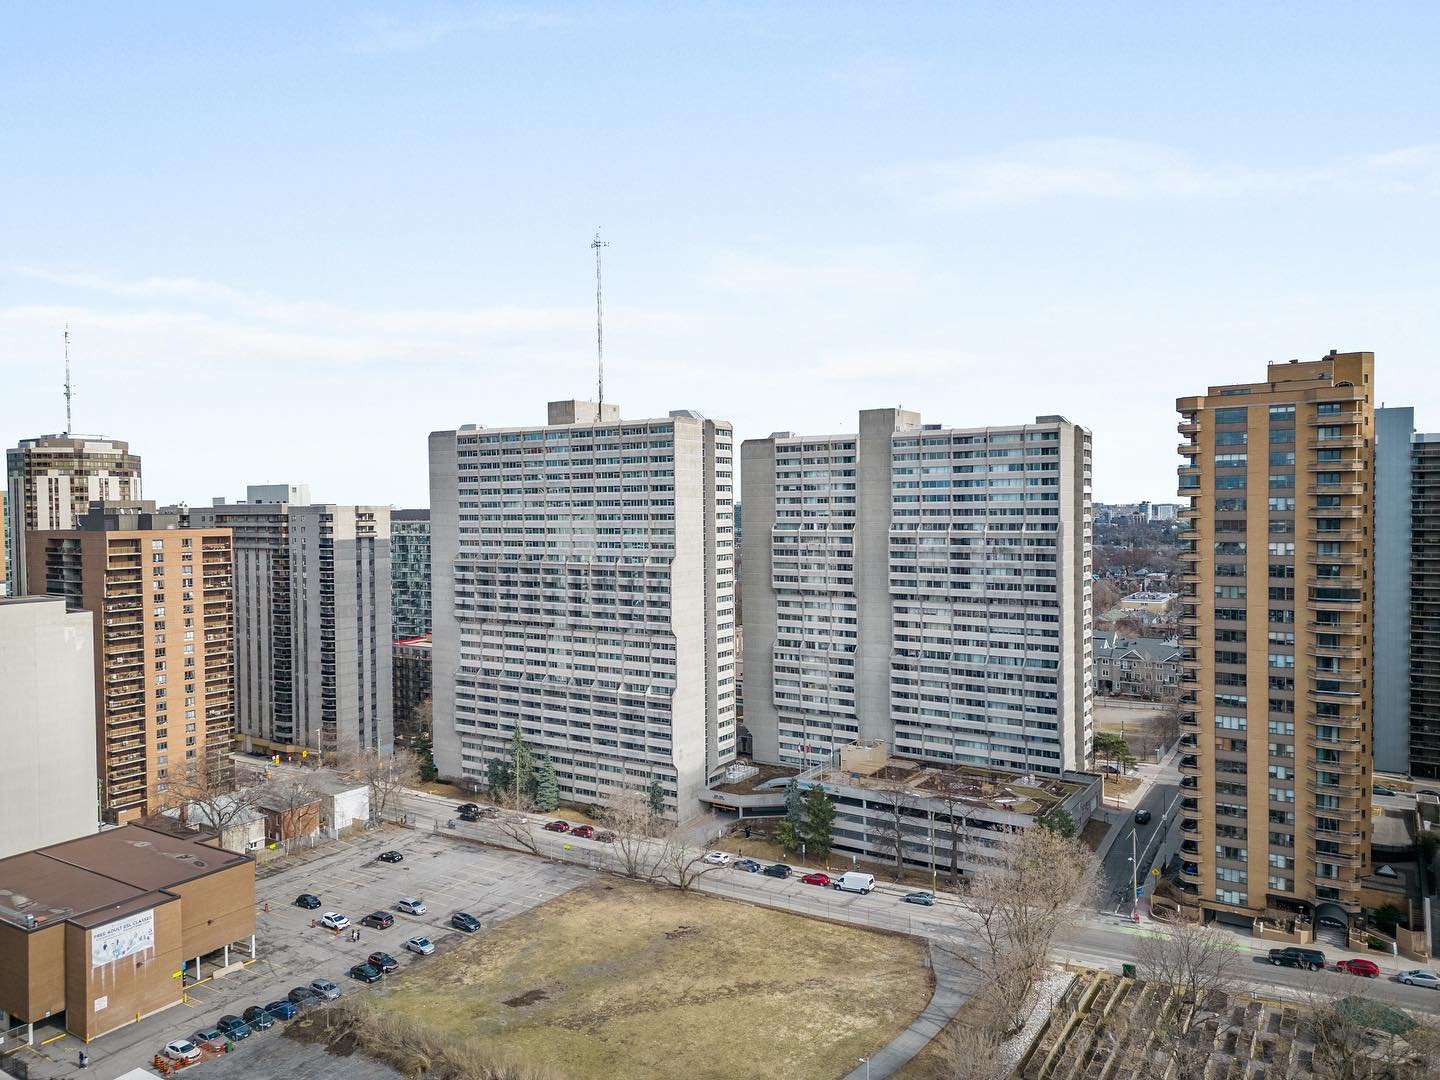 530 Laurier Avenue Unit 2305

✔️ Expansive 2 bedroom condo in Centretown
✔️ Generously sized floor plan
✔️ All utilities included in condo fee (heat+hydro!)
✔️ Expansive windows throughout
✔️ Hardwood flooring adds elegance
✔️ Spacious balcony for ci